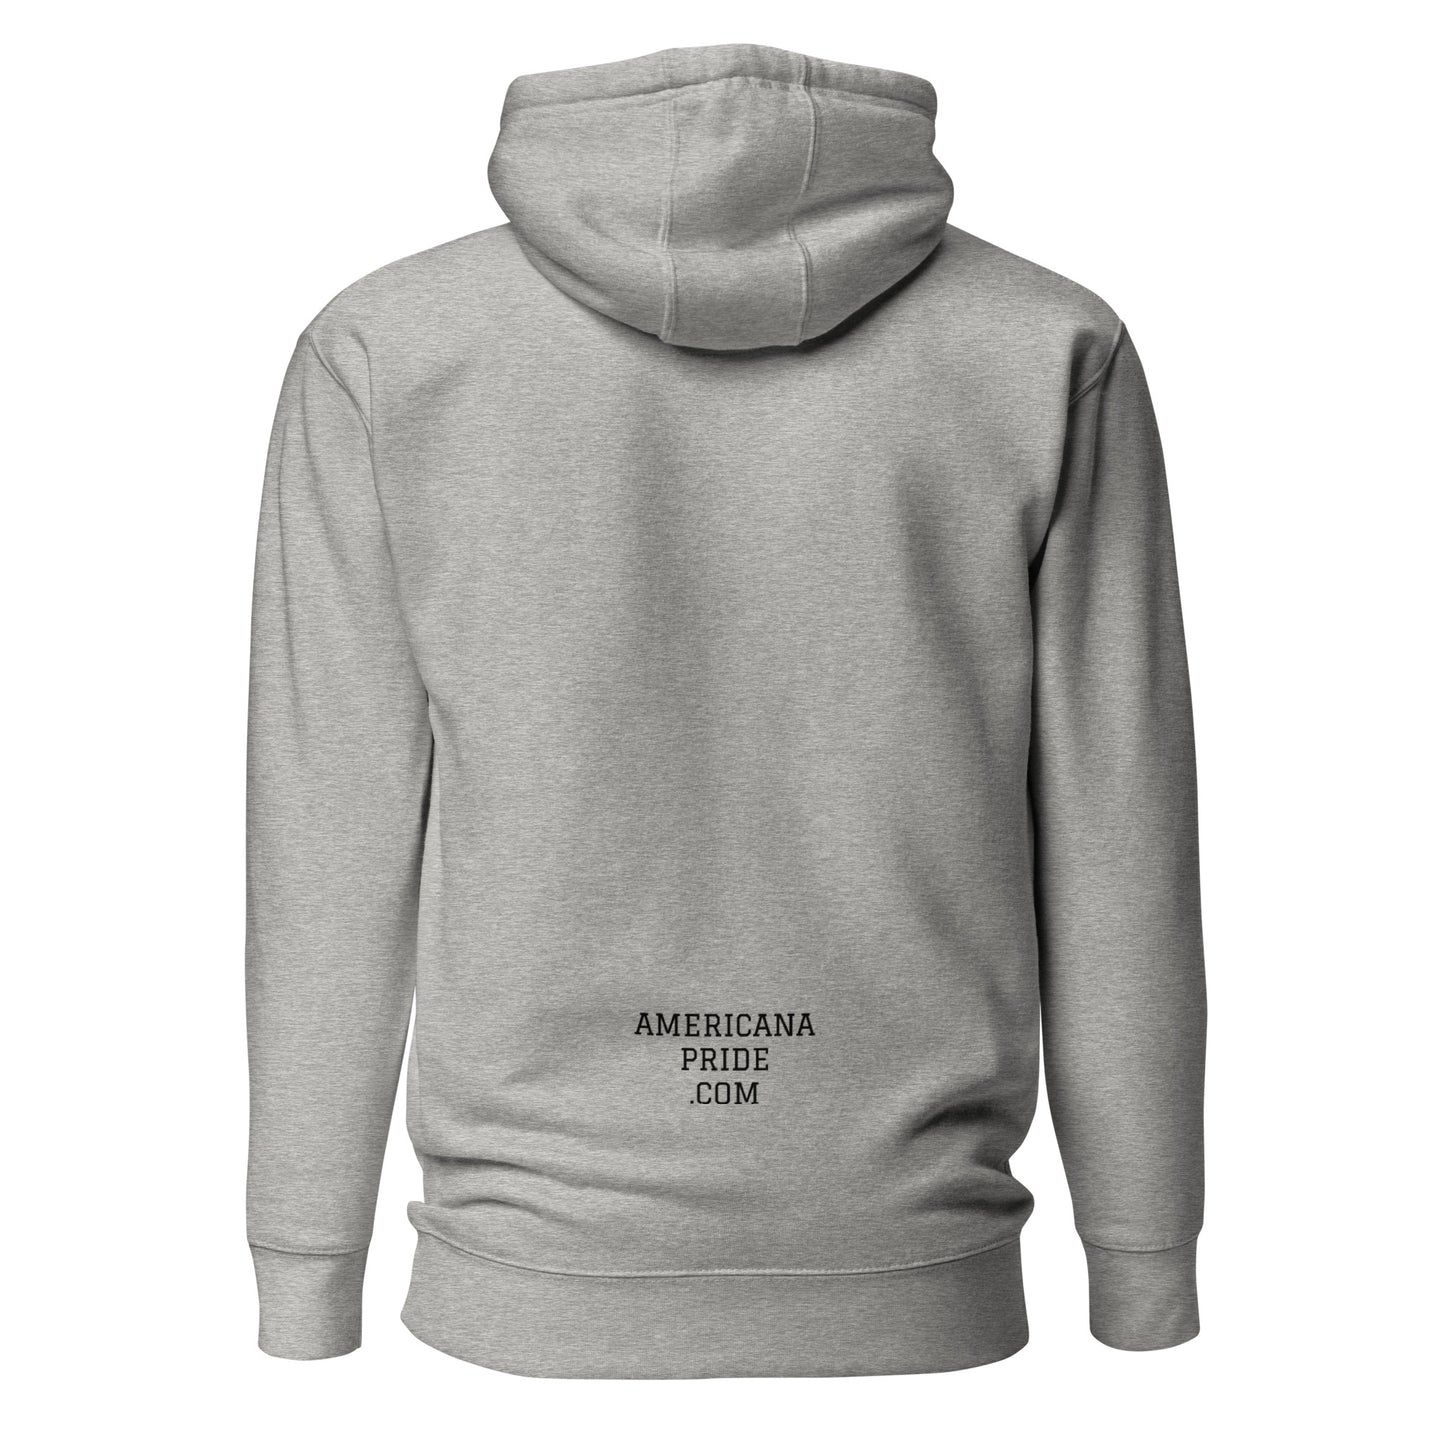 In this family there is strength...Unisex Hoodie